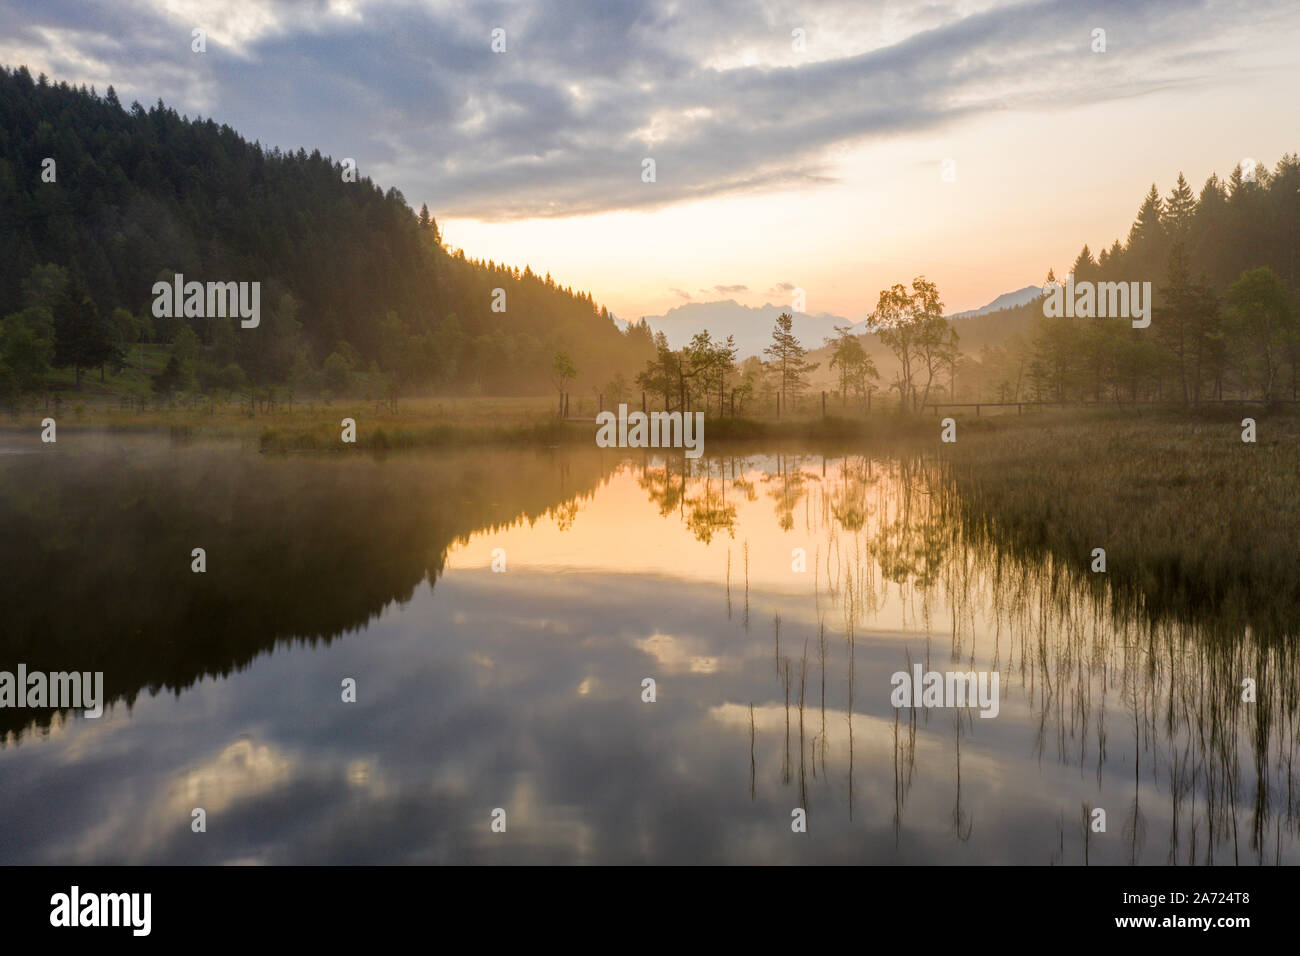 Sunrise over trees mirrored in swamp, Pian di Gembro Nature Reserve, aerial view, Aprica, Valtellina, Lombardy, Italy Stock Photo